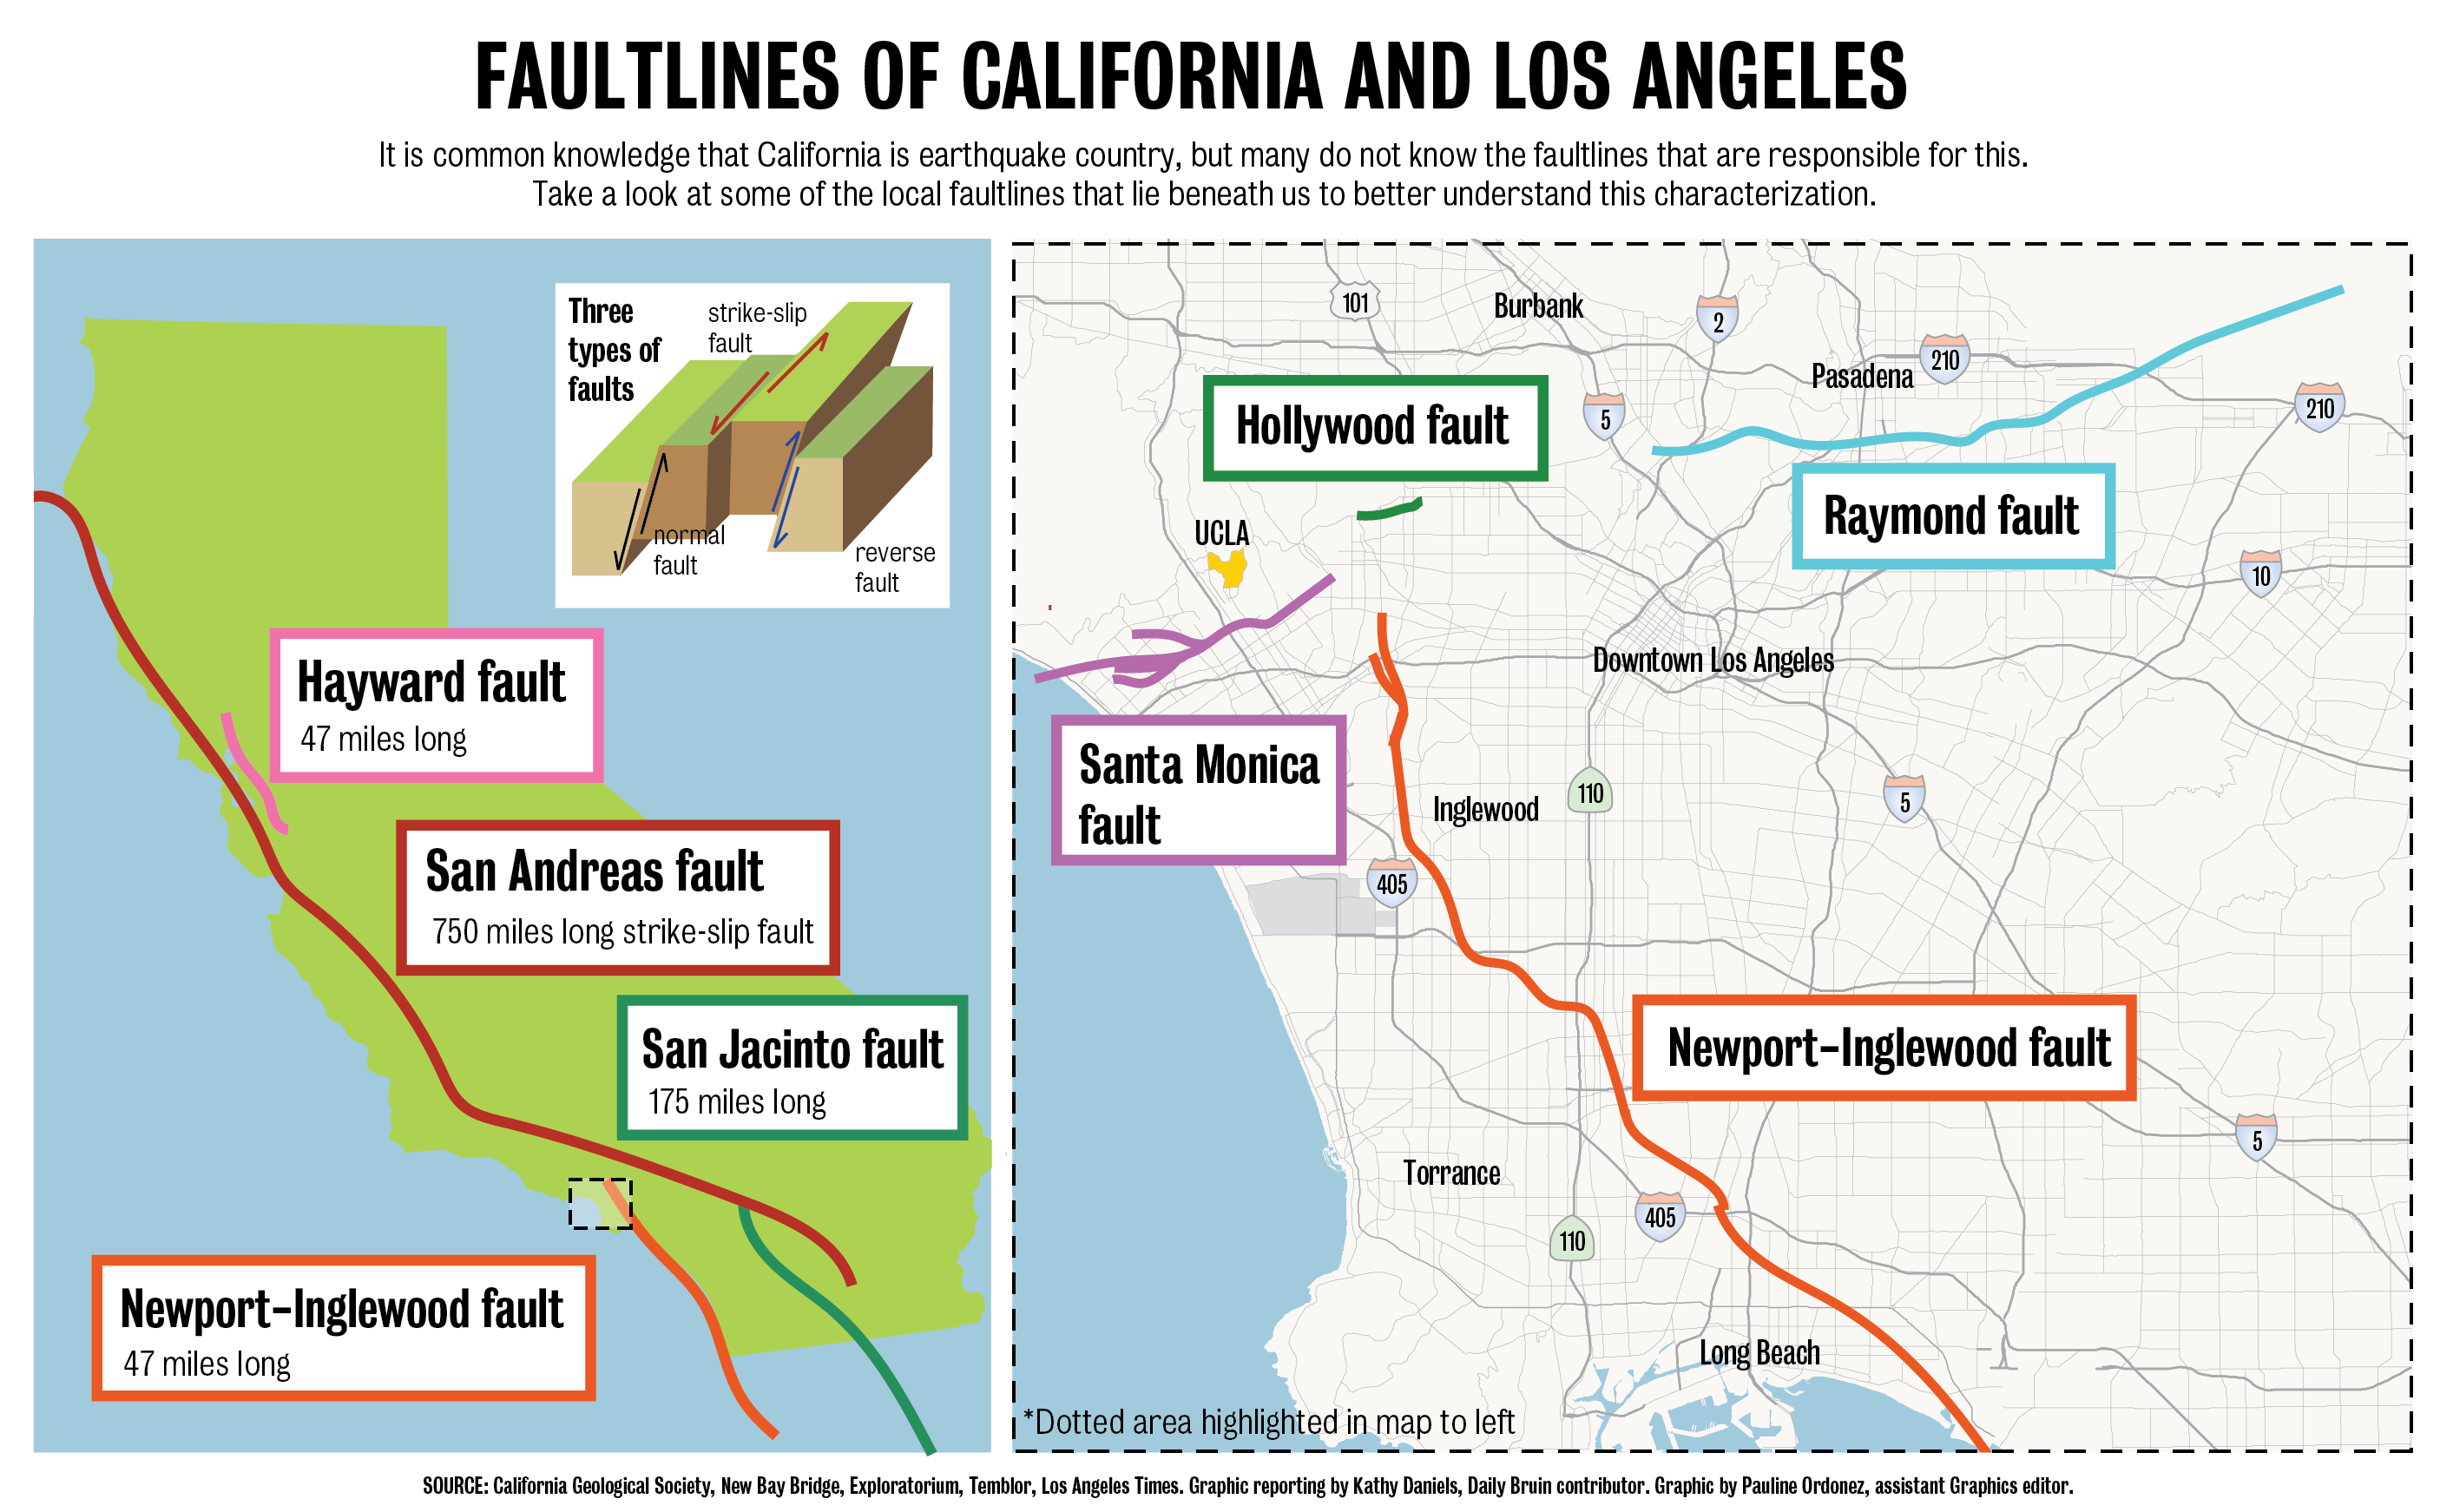 los angeles california fault line map Graphic Fault Lines Of California And Los Angeles Daily Bruin los angeles california fault line map